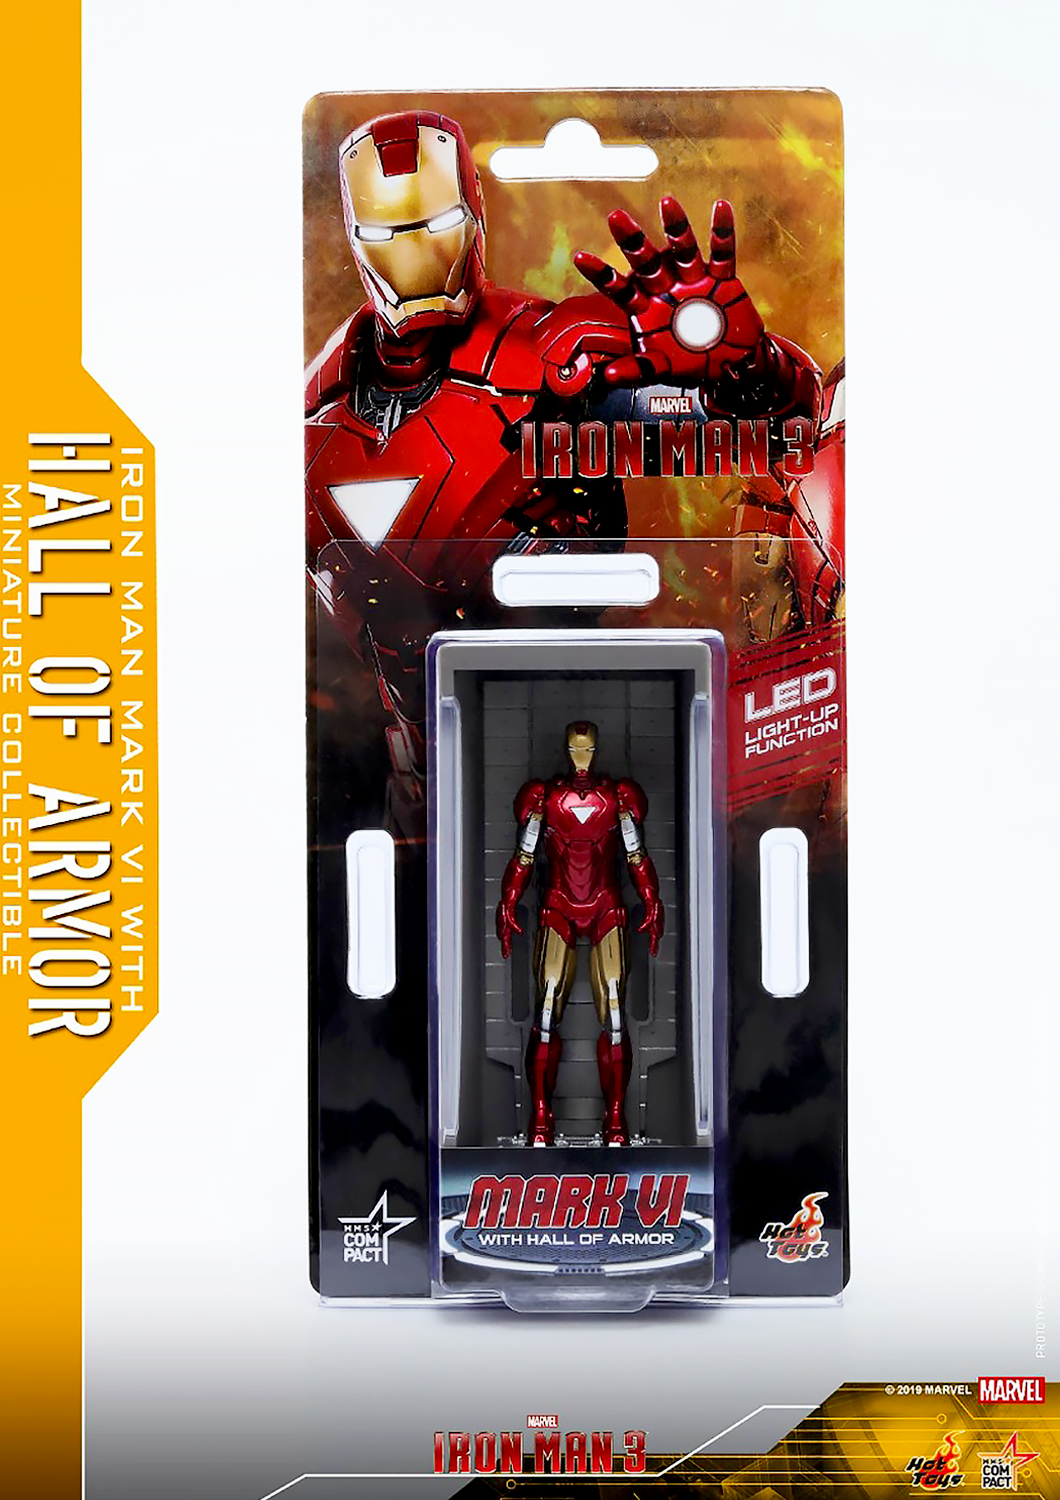 HOT TOYS MARVEL IRON MAN MARK VI - MARK 6 WITH HALL OF ARMOR MINIATURE COLLECTIBLE - MMSC010 - Anotoys Collectibles